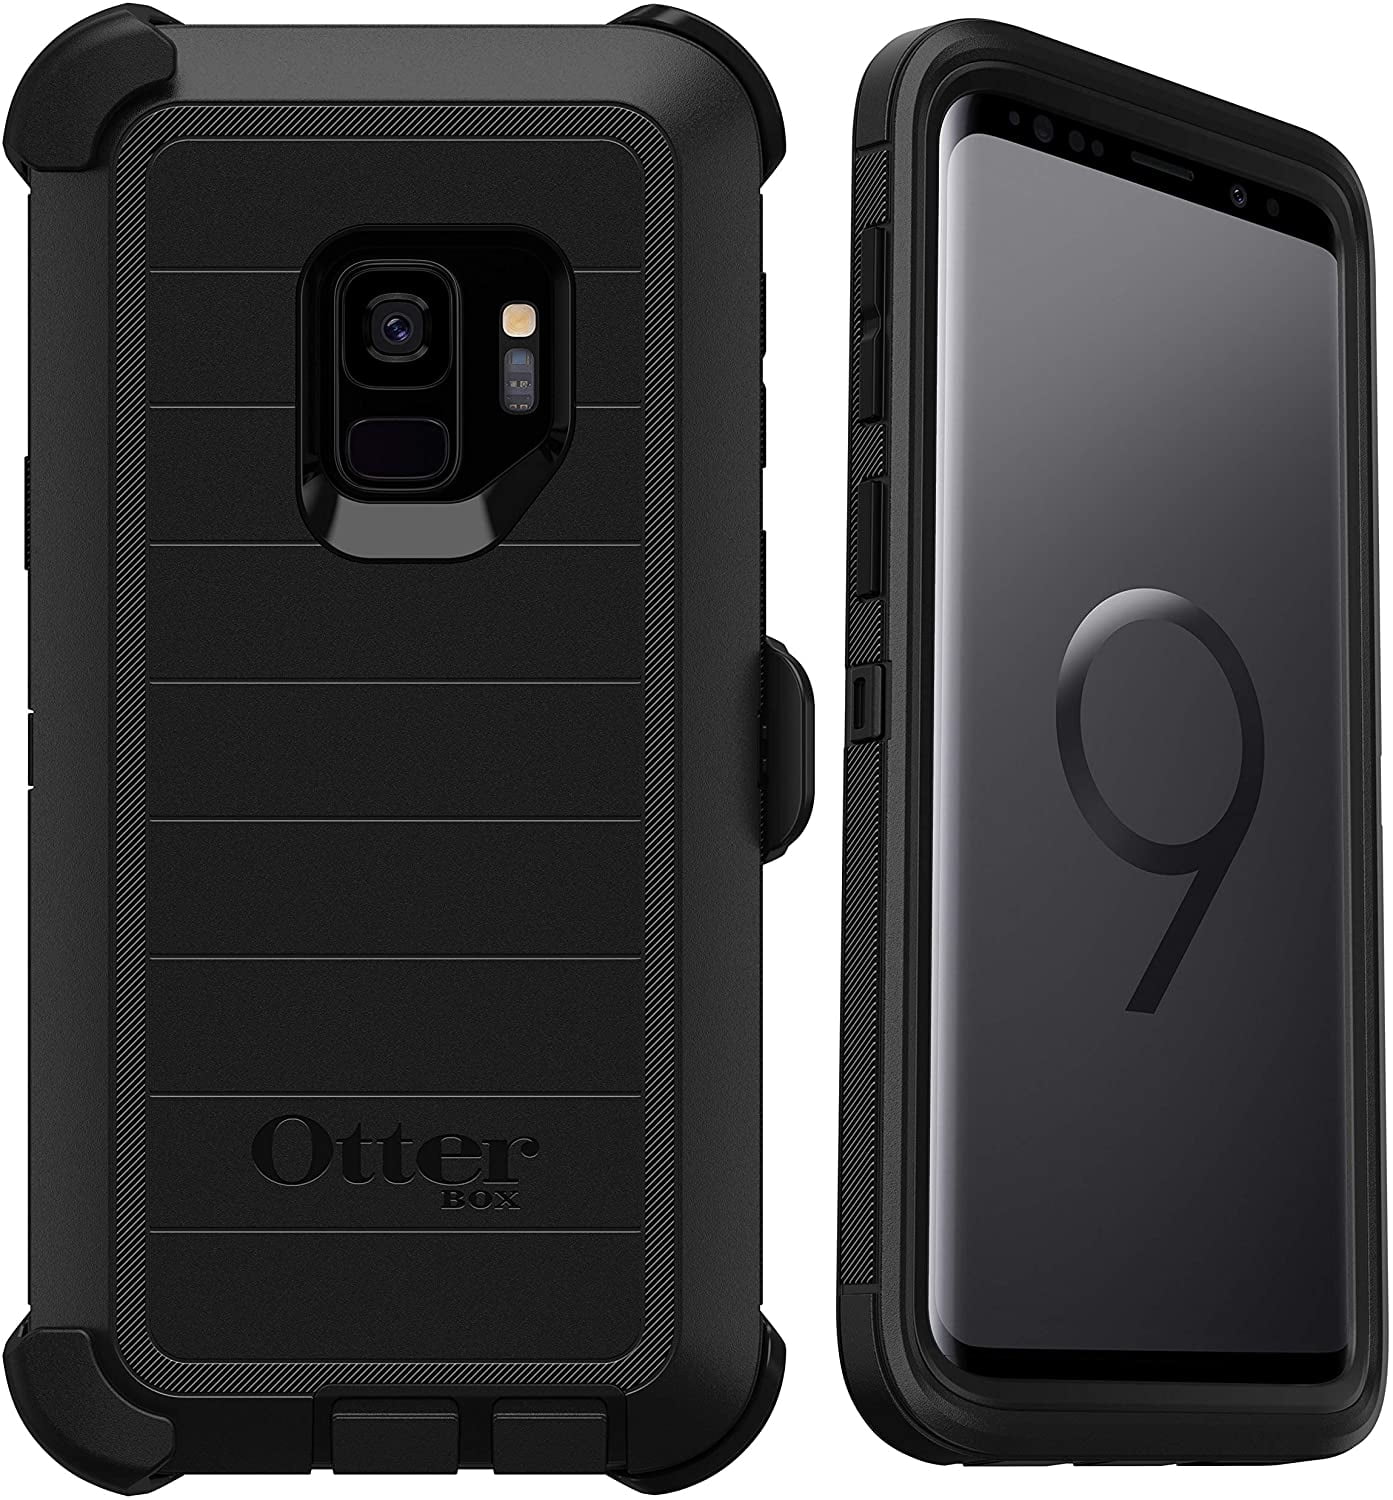 OtterBox Defender Series Rugged Case & Holster for Samsung Galaxy S9, Black